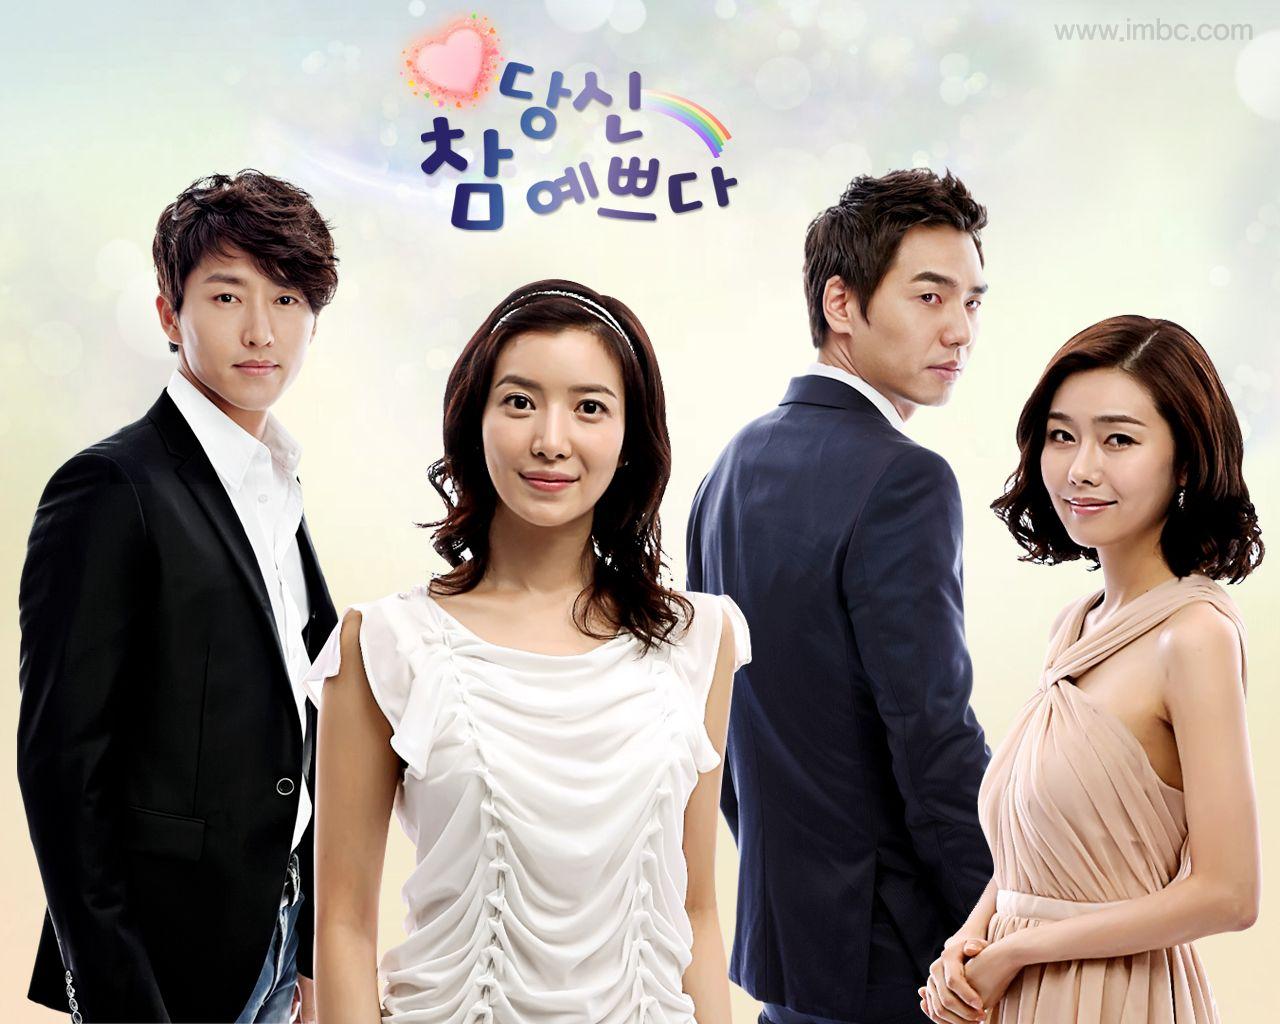 Added posters, wallpaper and videos for the upcoming Korean drama